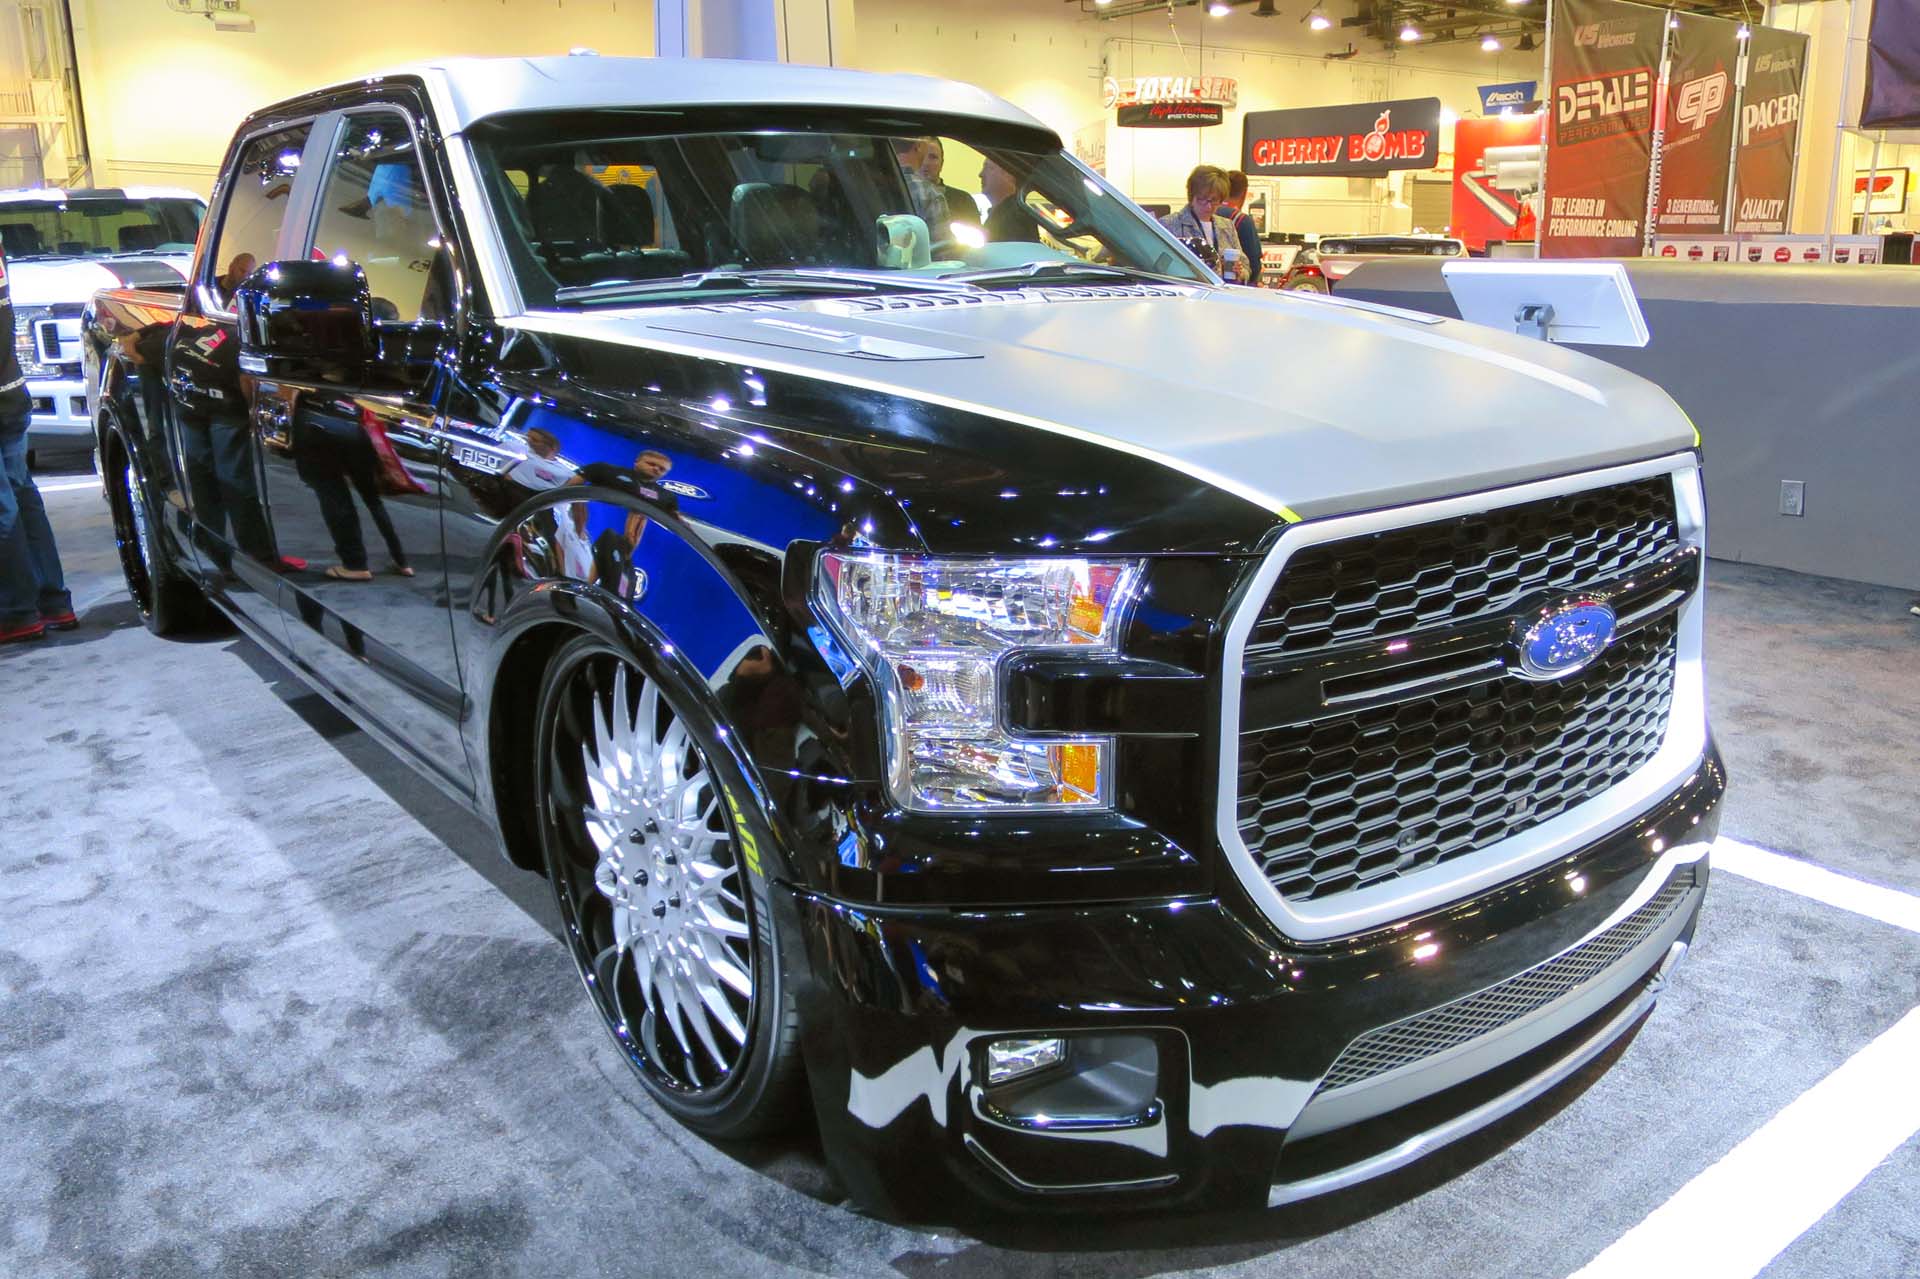 Ford's F-150 SuperCrew is modified by Bojix Design with larger turbochargers on the EcoBoost engine, Full Race intake system, seven-inch lift kit, and Brembo brakes.